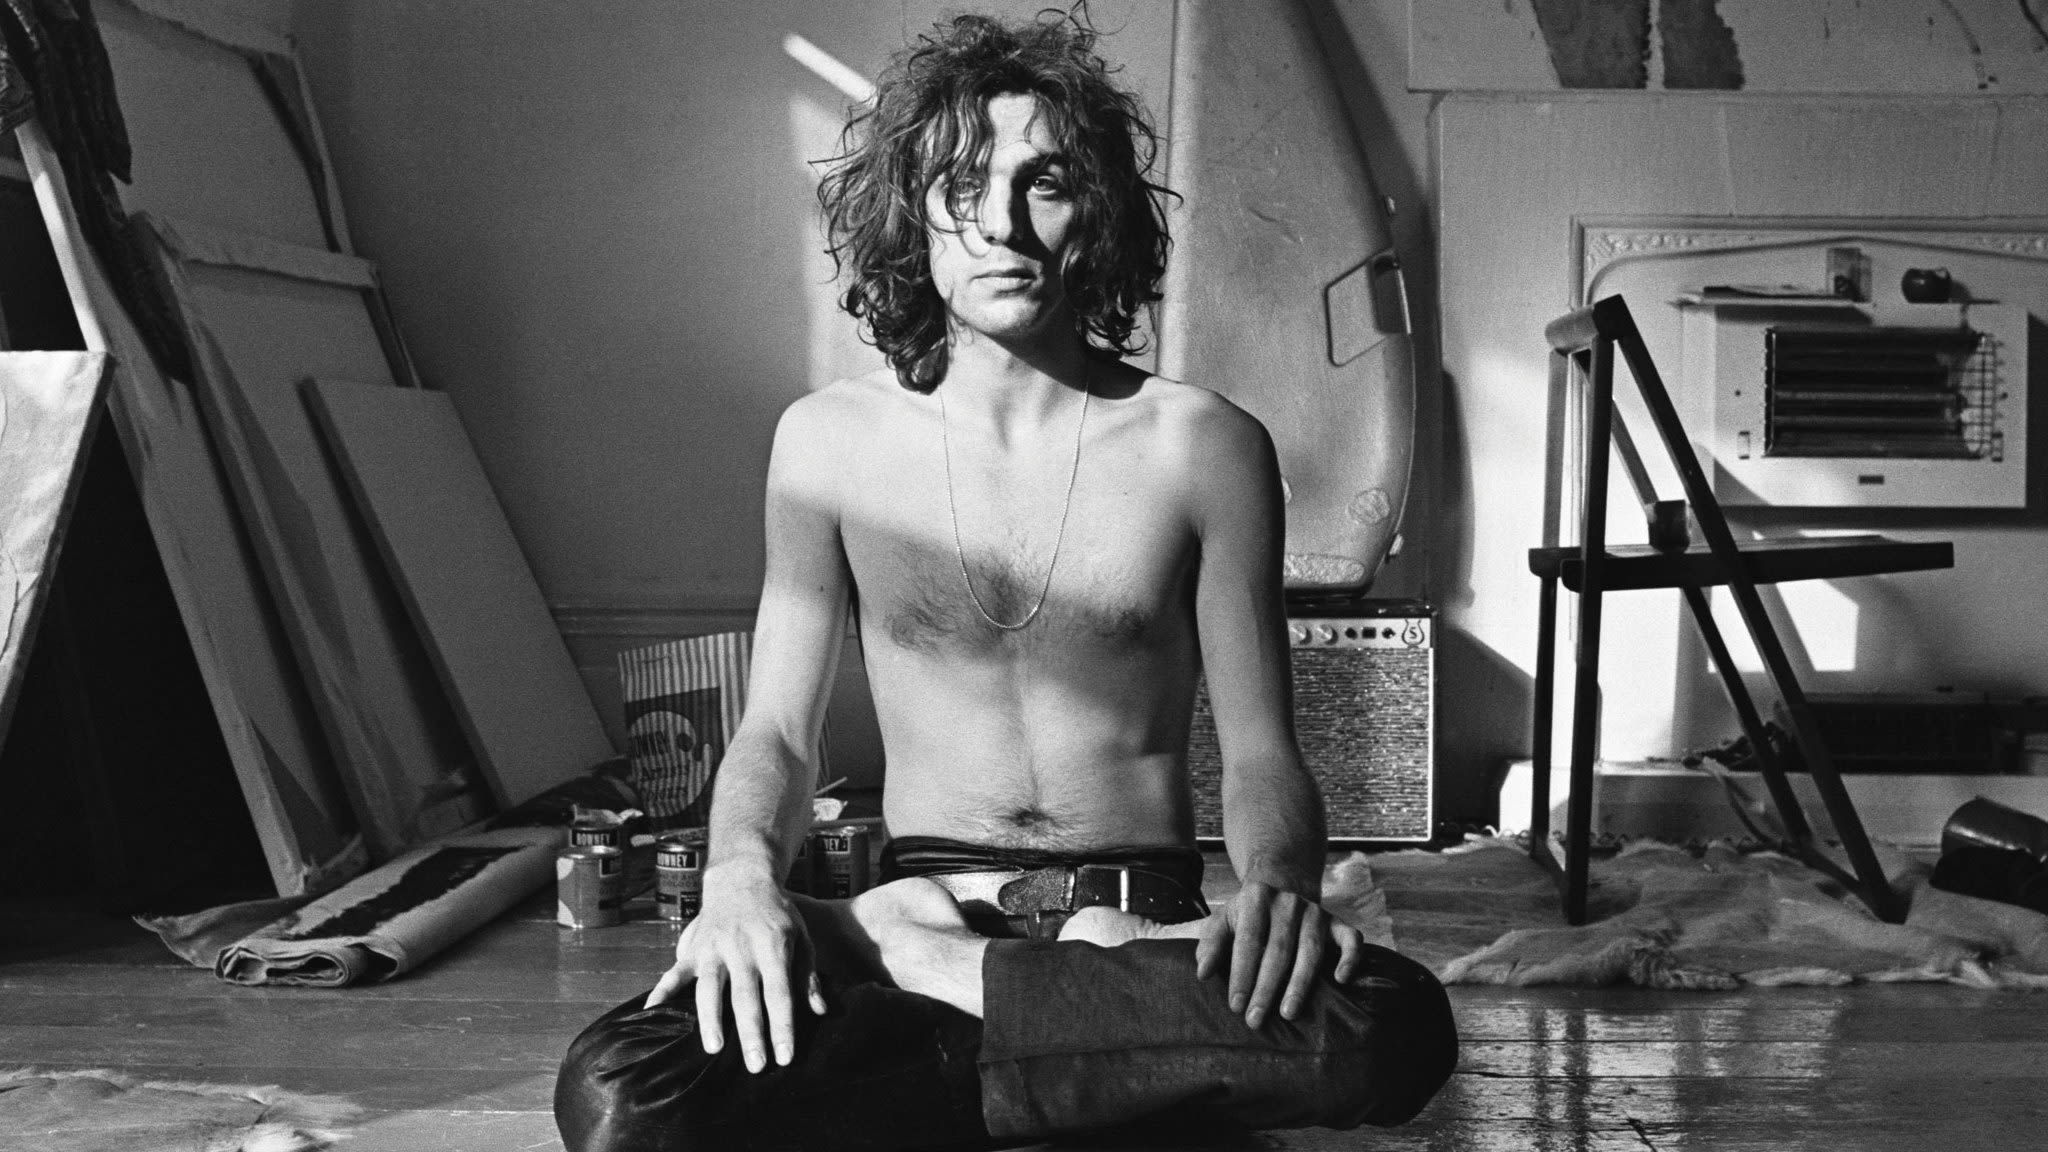 Earliest known Syd Barrett painting to be auctioned